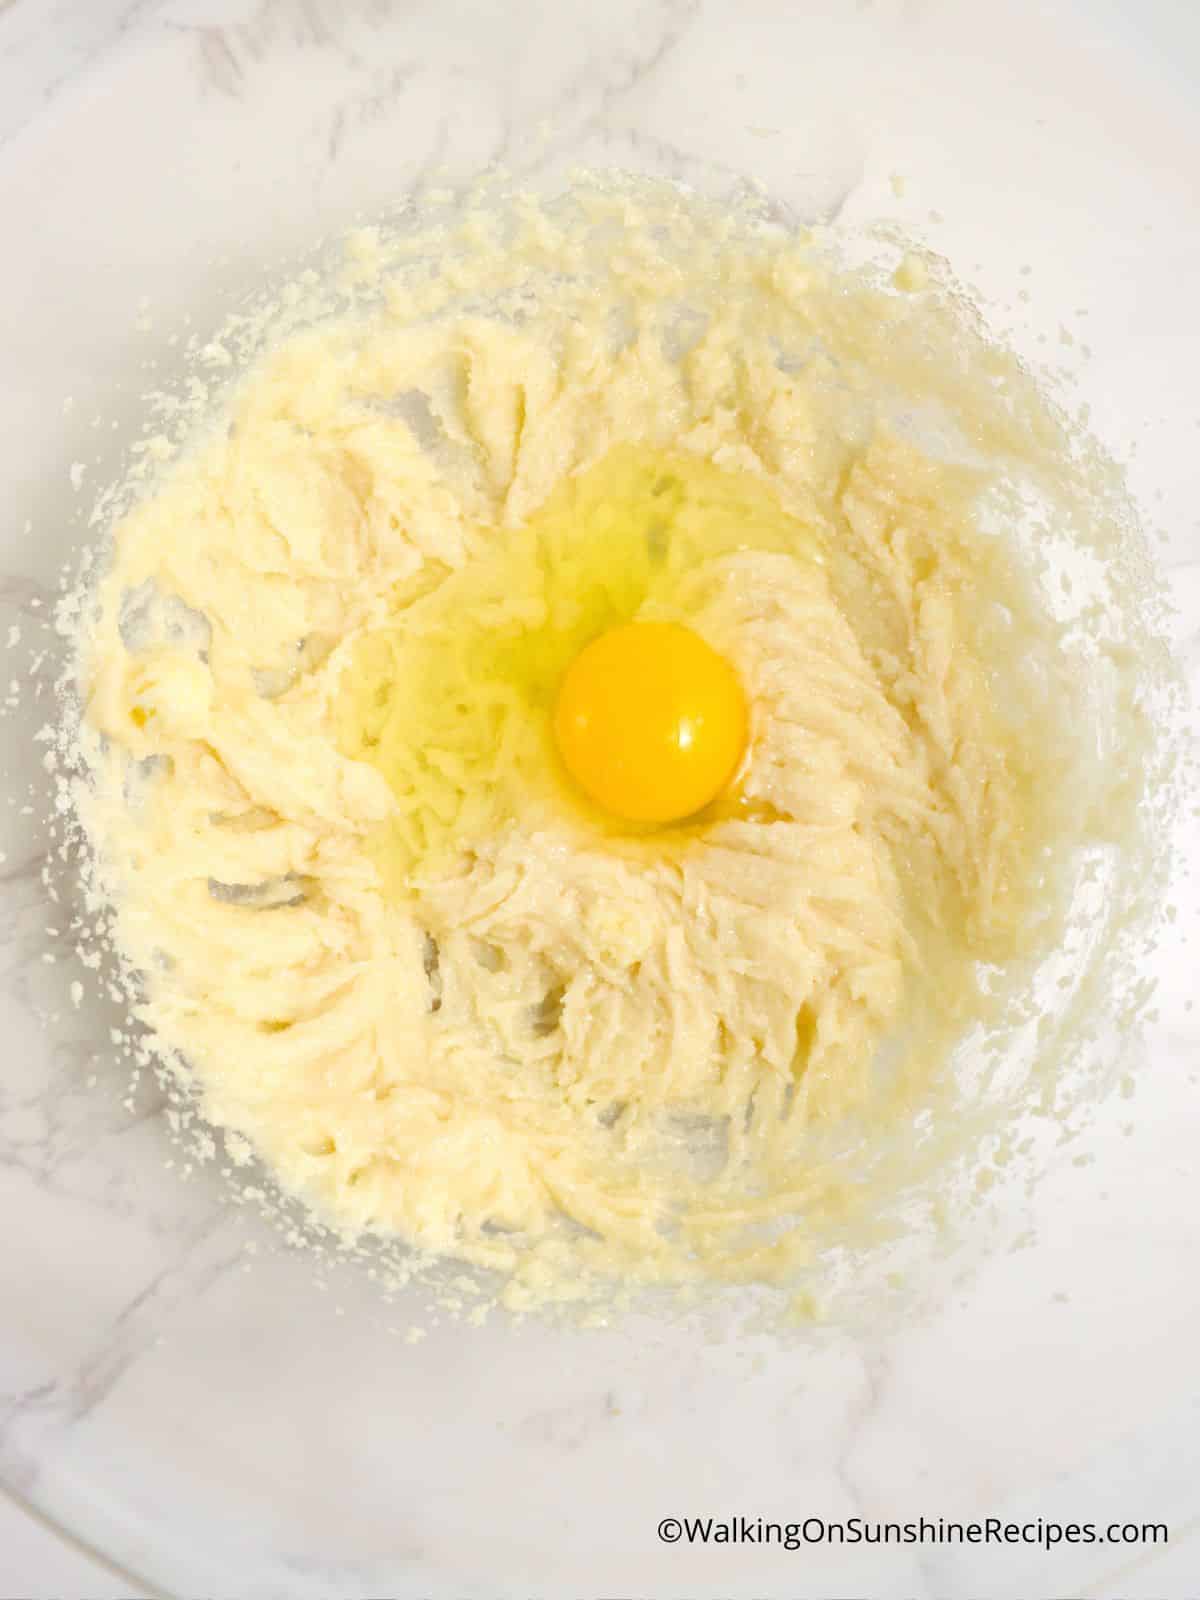 egg in sugar and butter mixture.